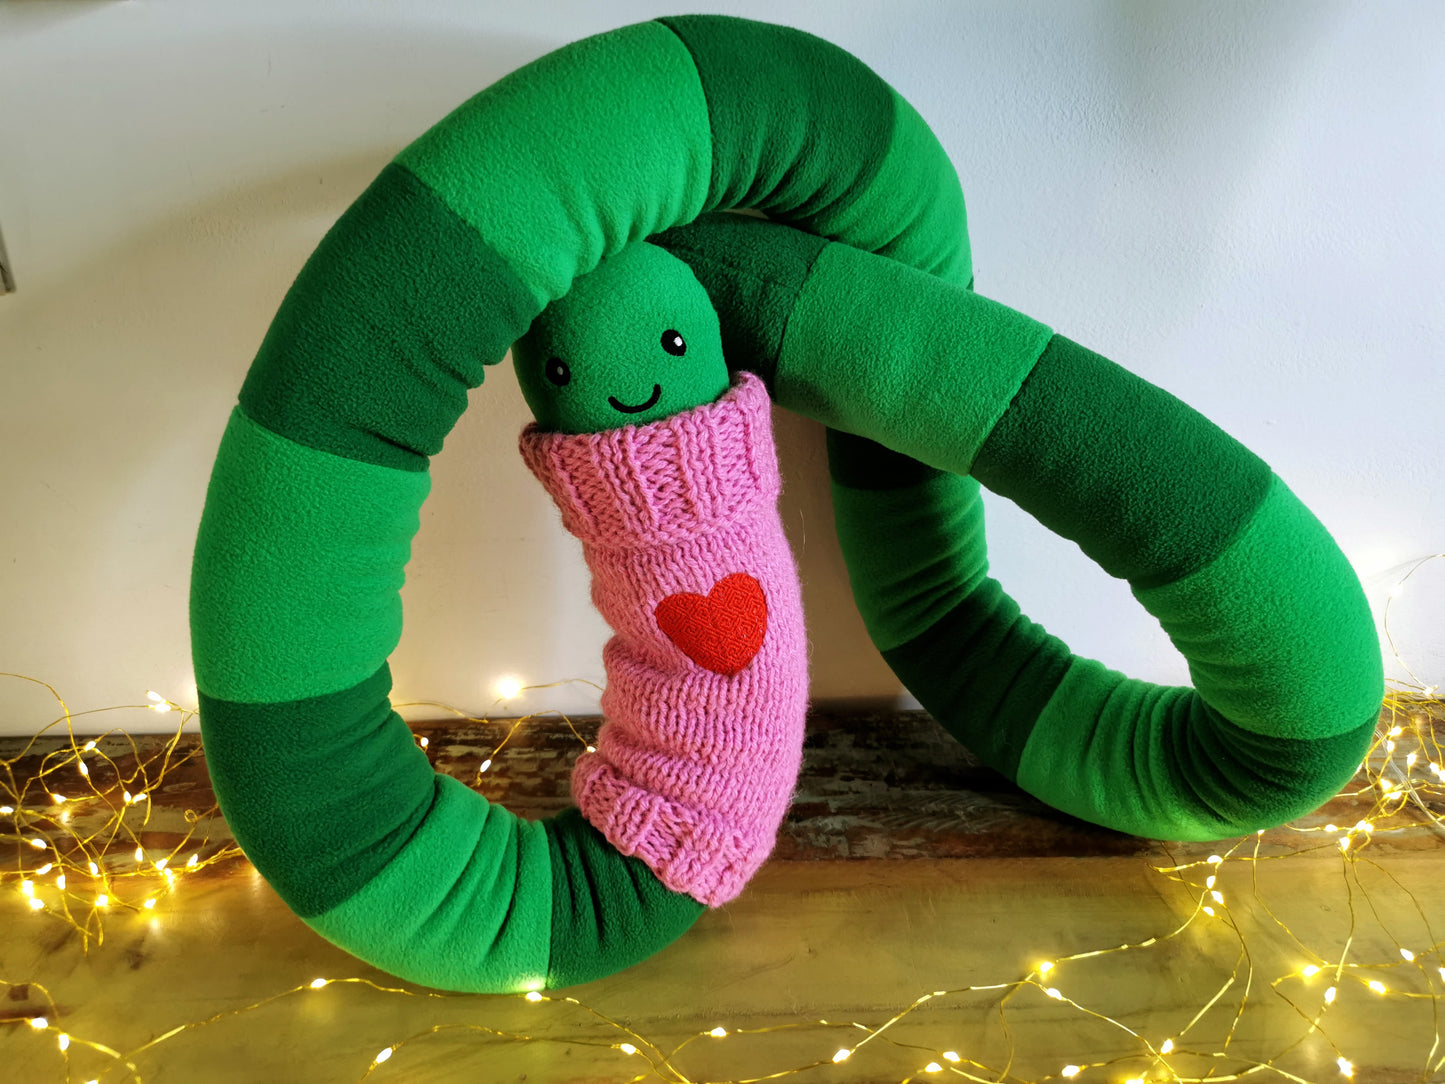 Cozy 200cm Giant Worm Plush: Perfect for Book Lovers!